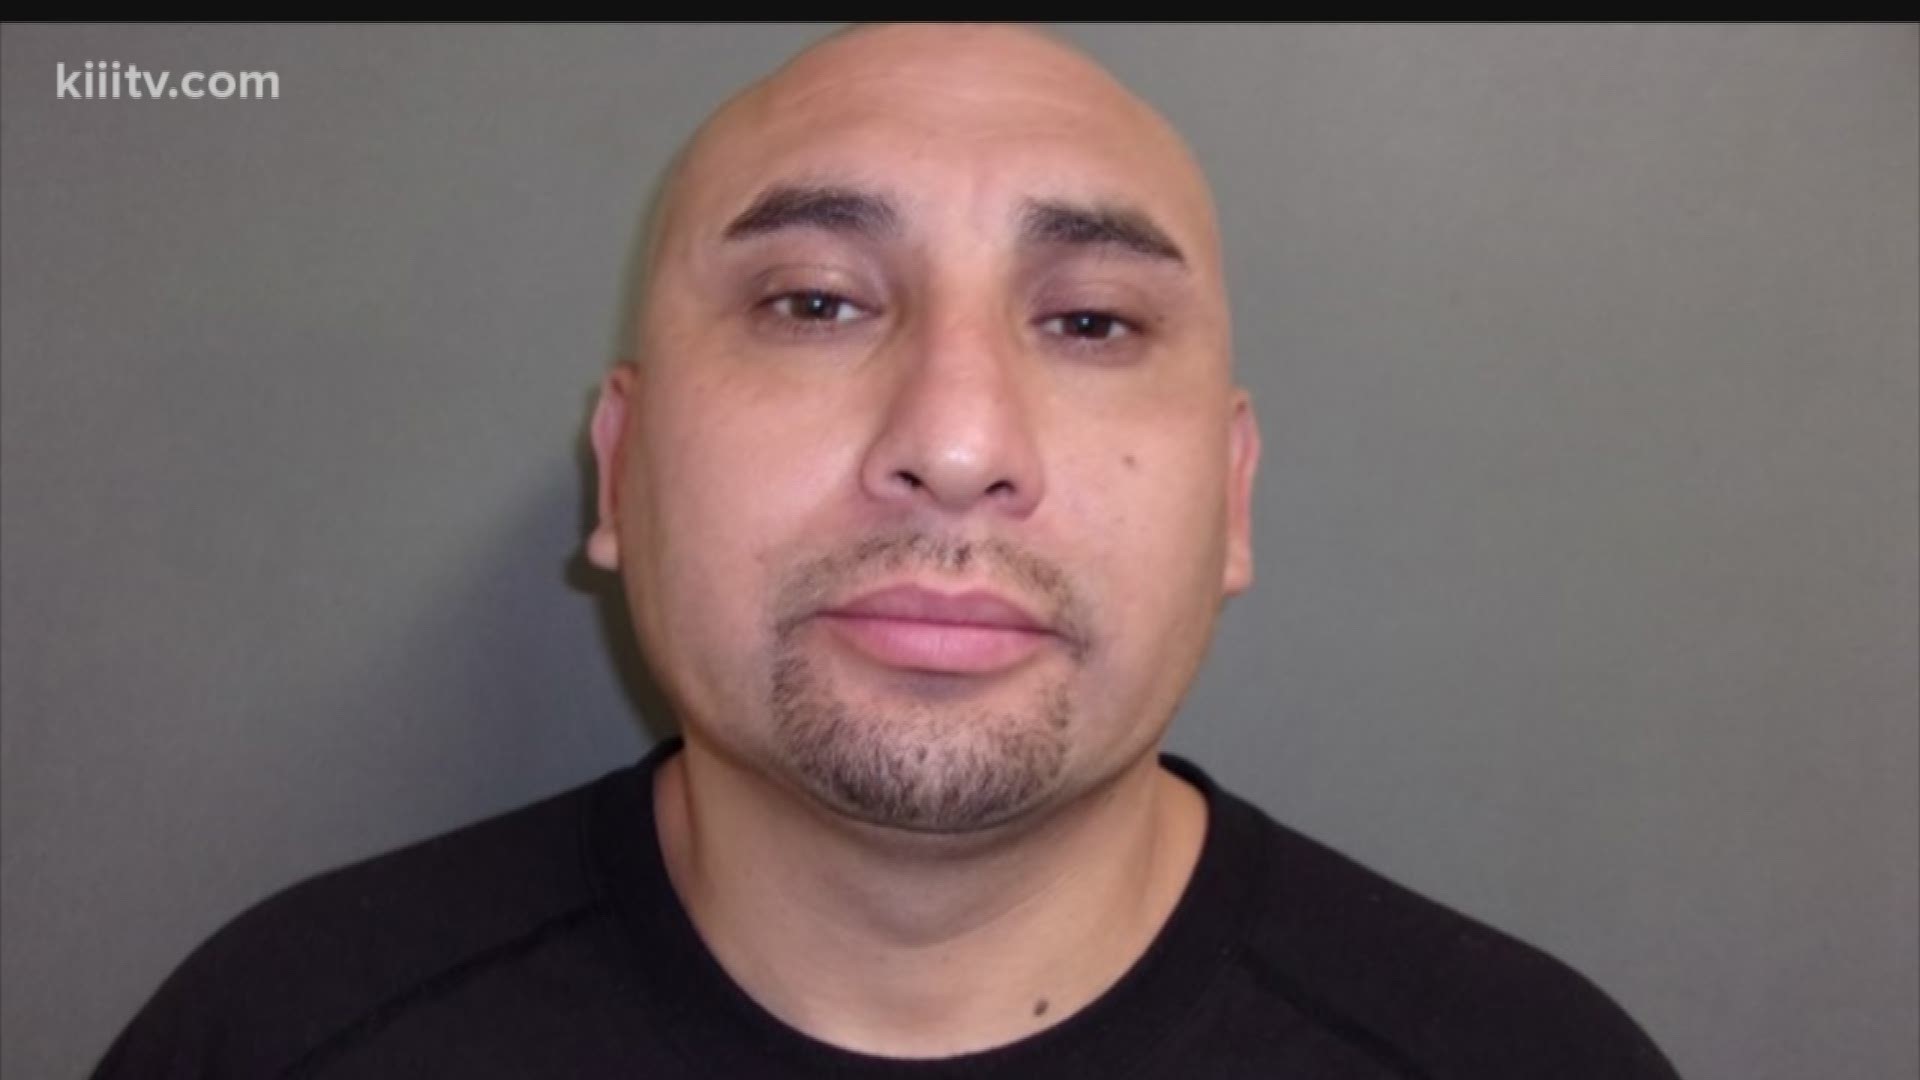 Ronnie Rodriguez Sr. is facing a Capital Murder charge after he allegedly shot five men at a child's birthday party on October 13 after an argument two families.